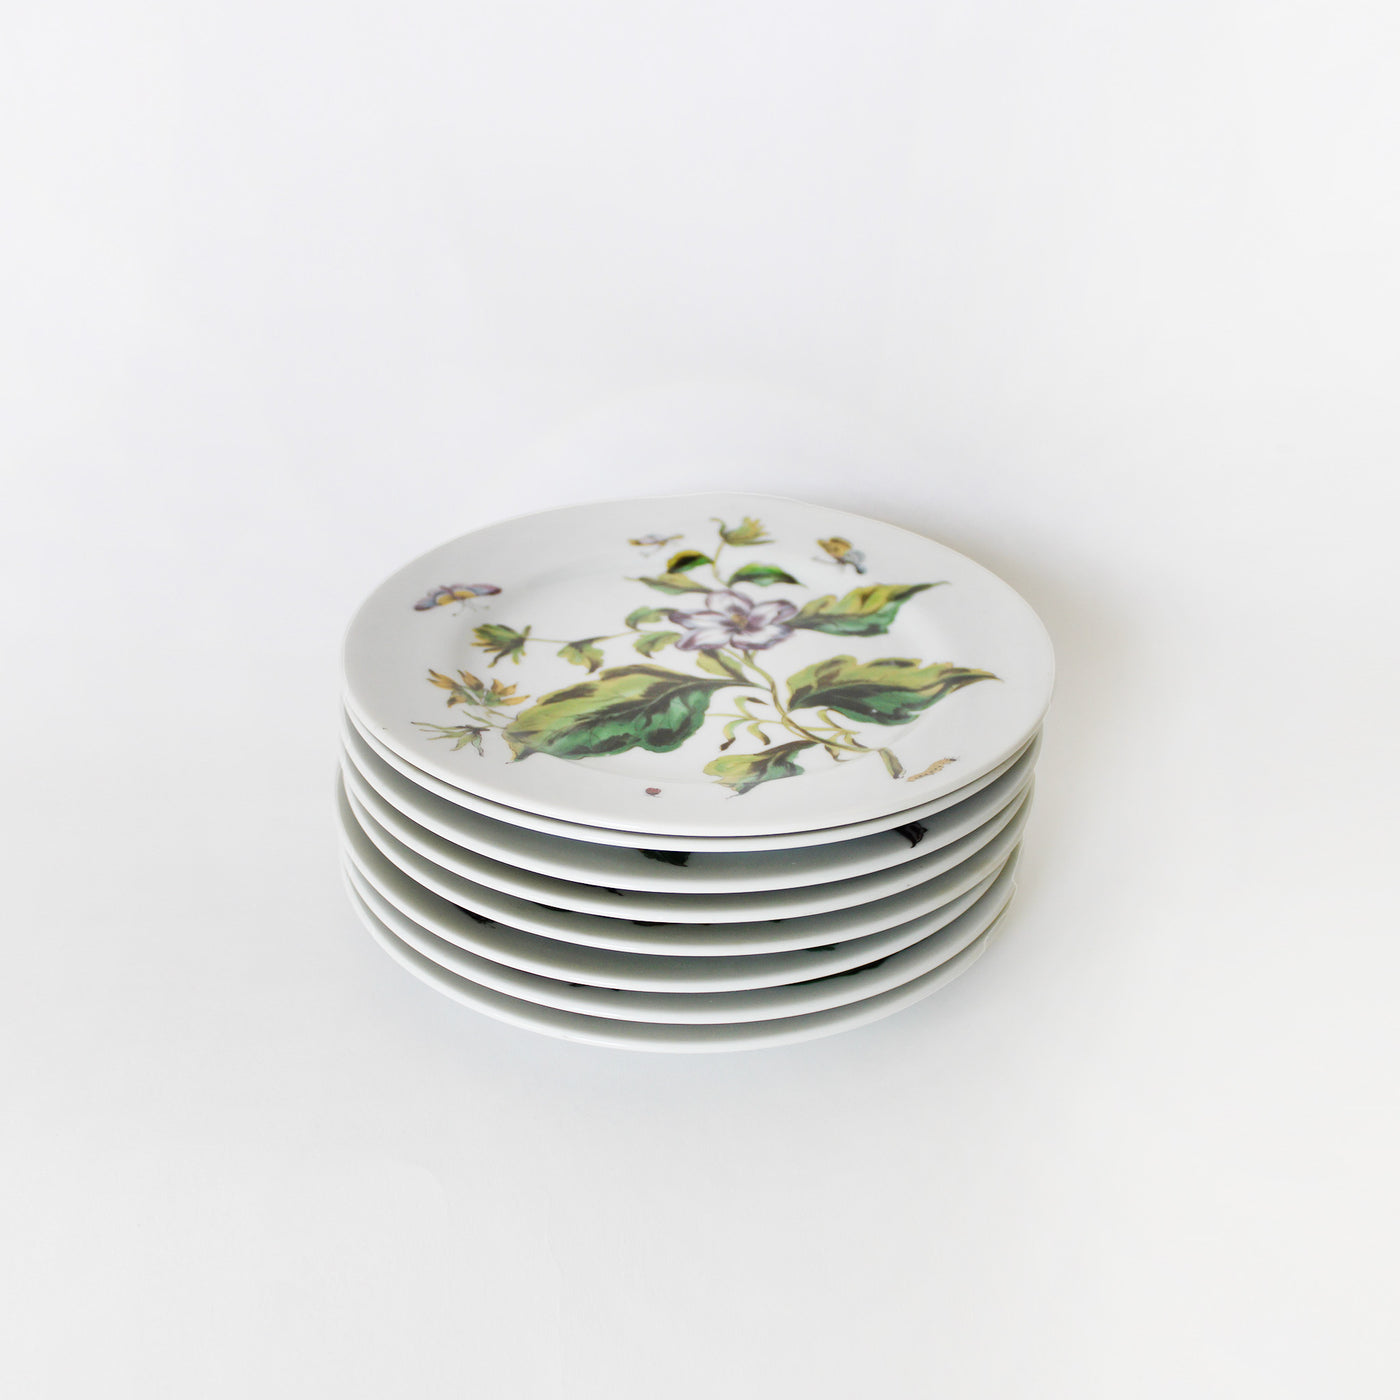 Exotic Plant Plate Set by Mottahedeh Design